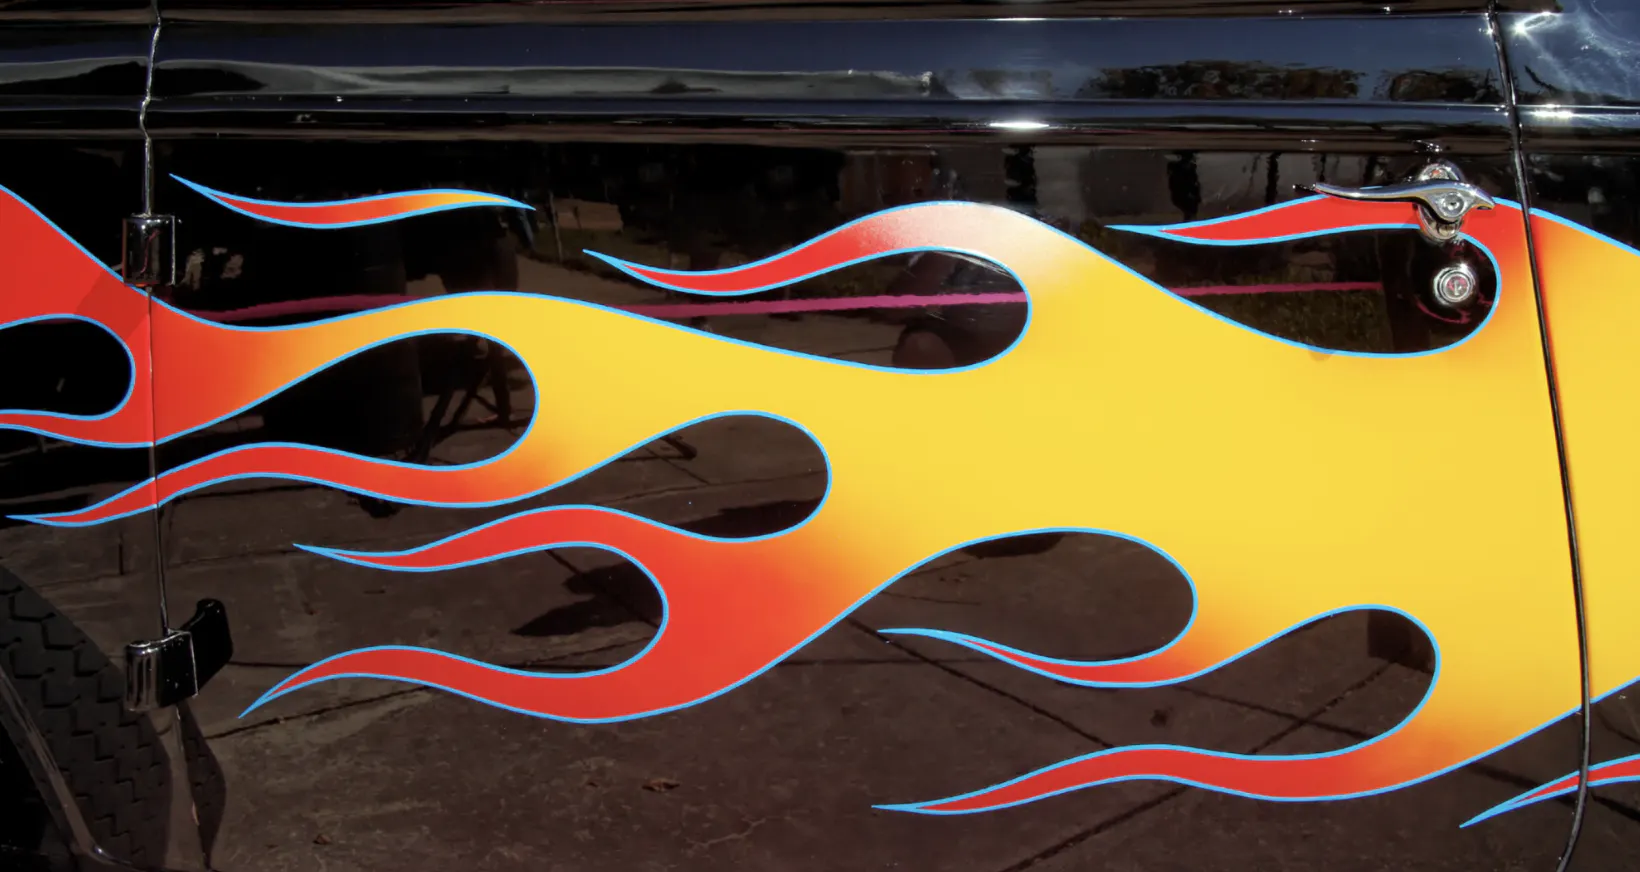 Flame detailing on side of car